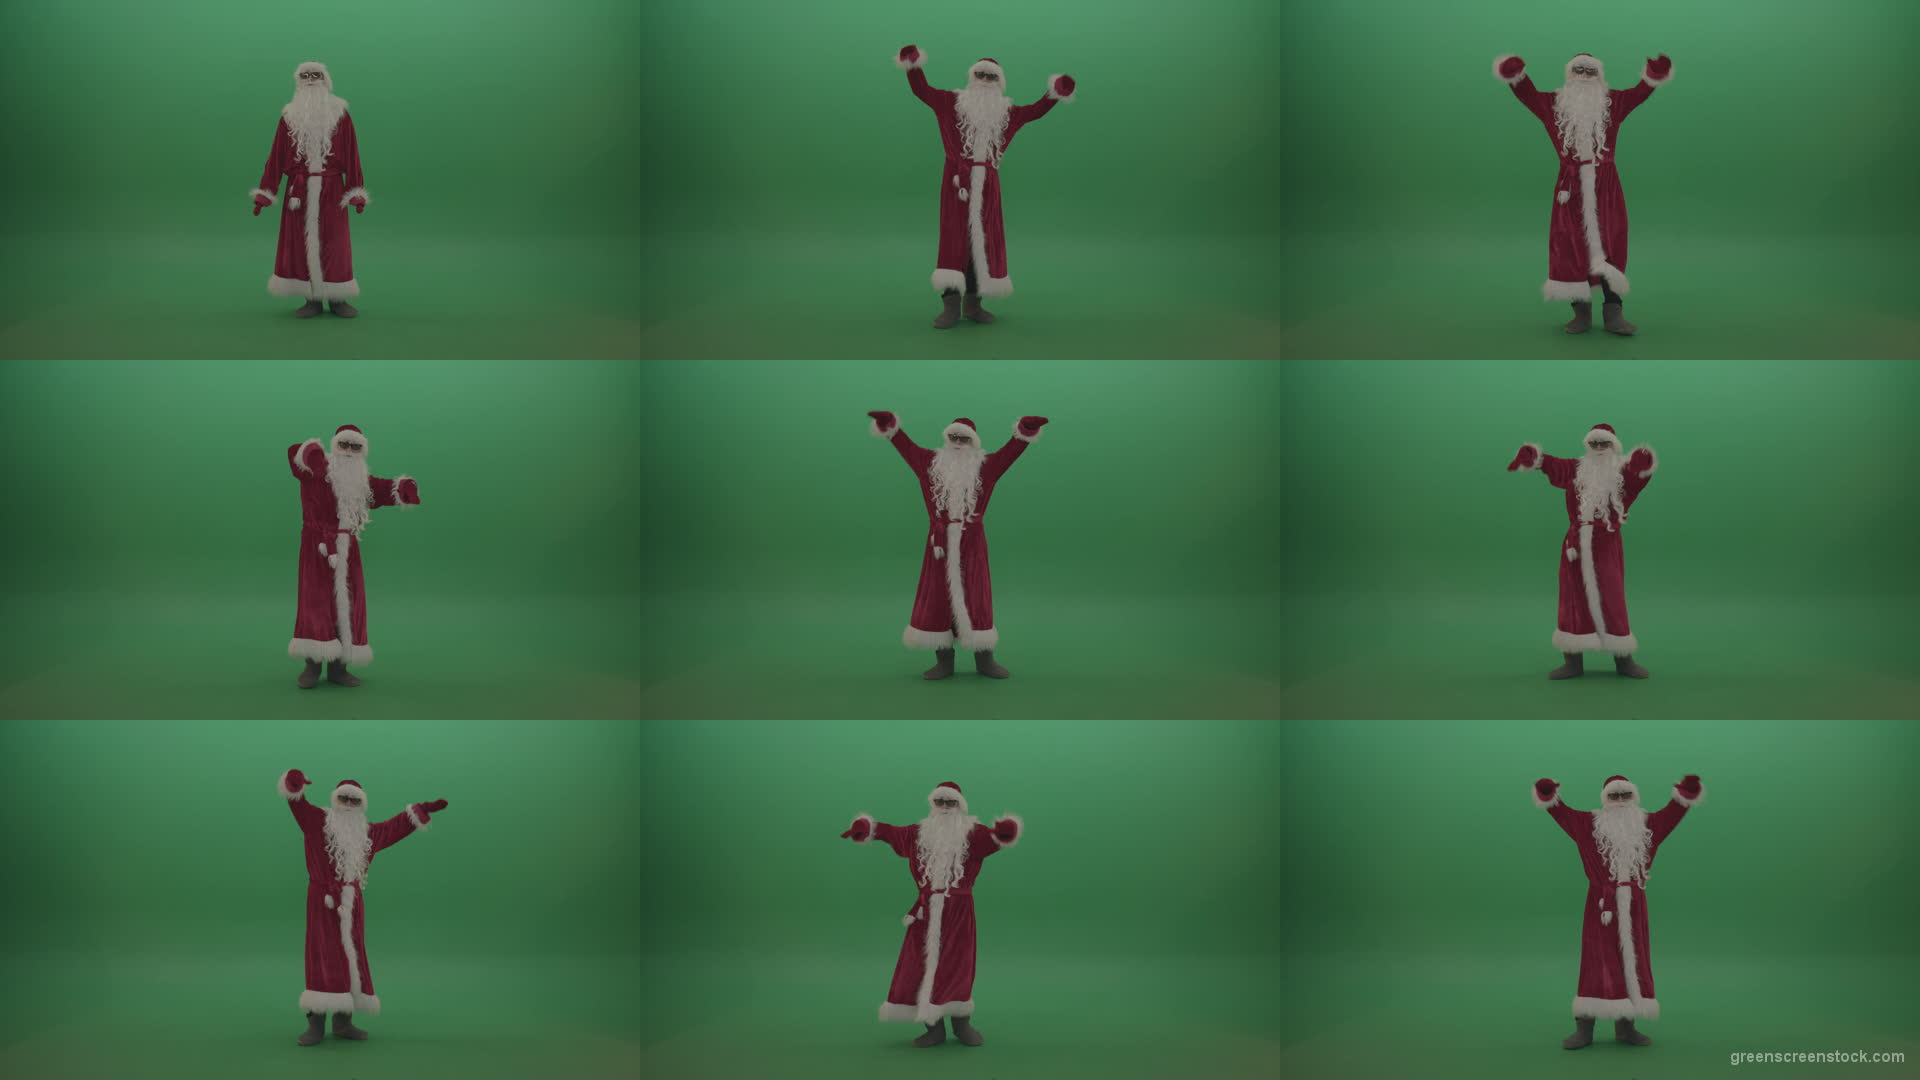 Santa-with-much-swagger-over-the-green-screen-background-1920 Green Screen Stock